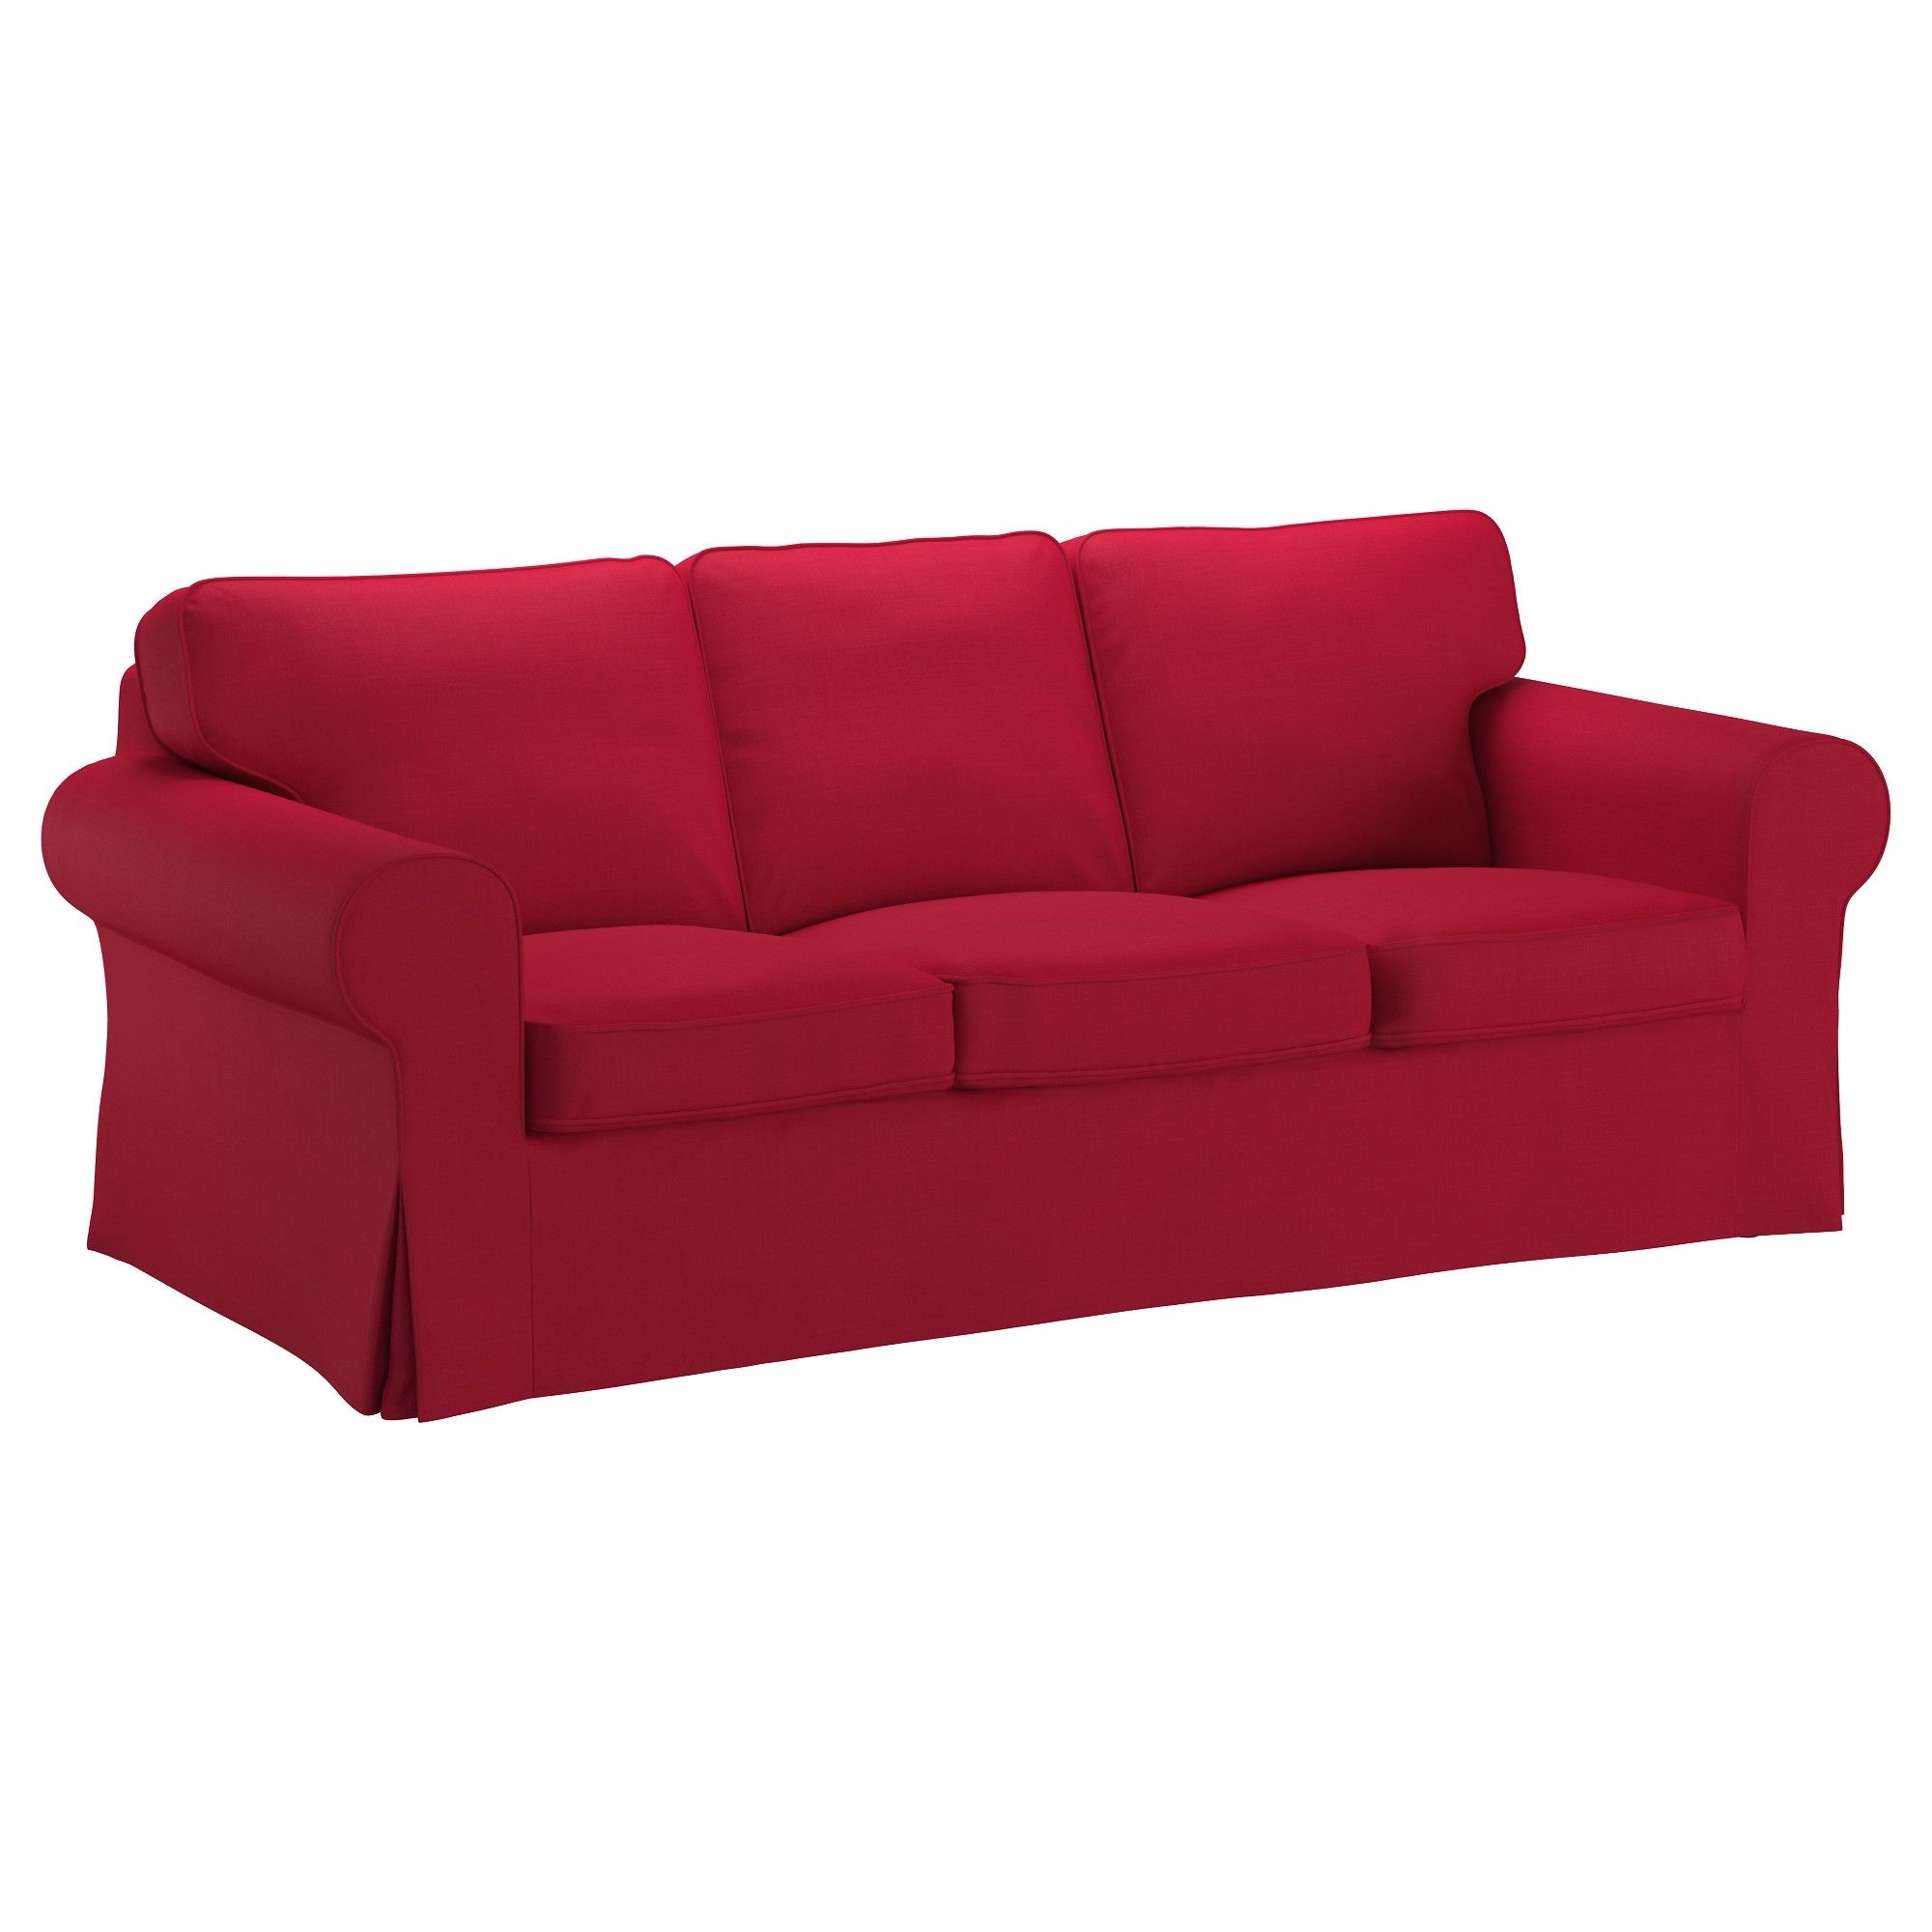 Fashionable Ektorp Sofa – Nordvalla Red – Ikea With Regard To Sofas With Removable Covers (View 11 of 15)